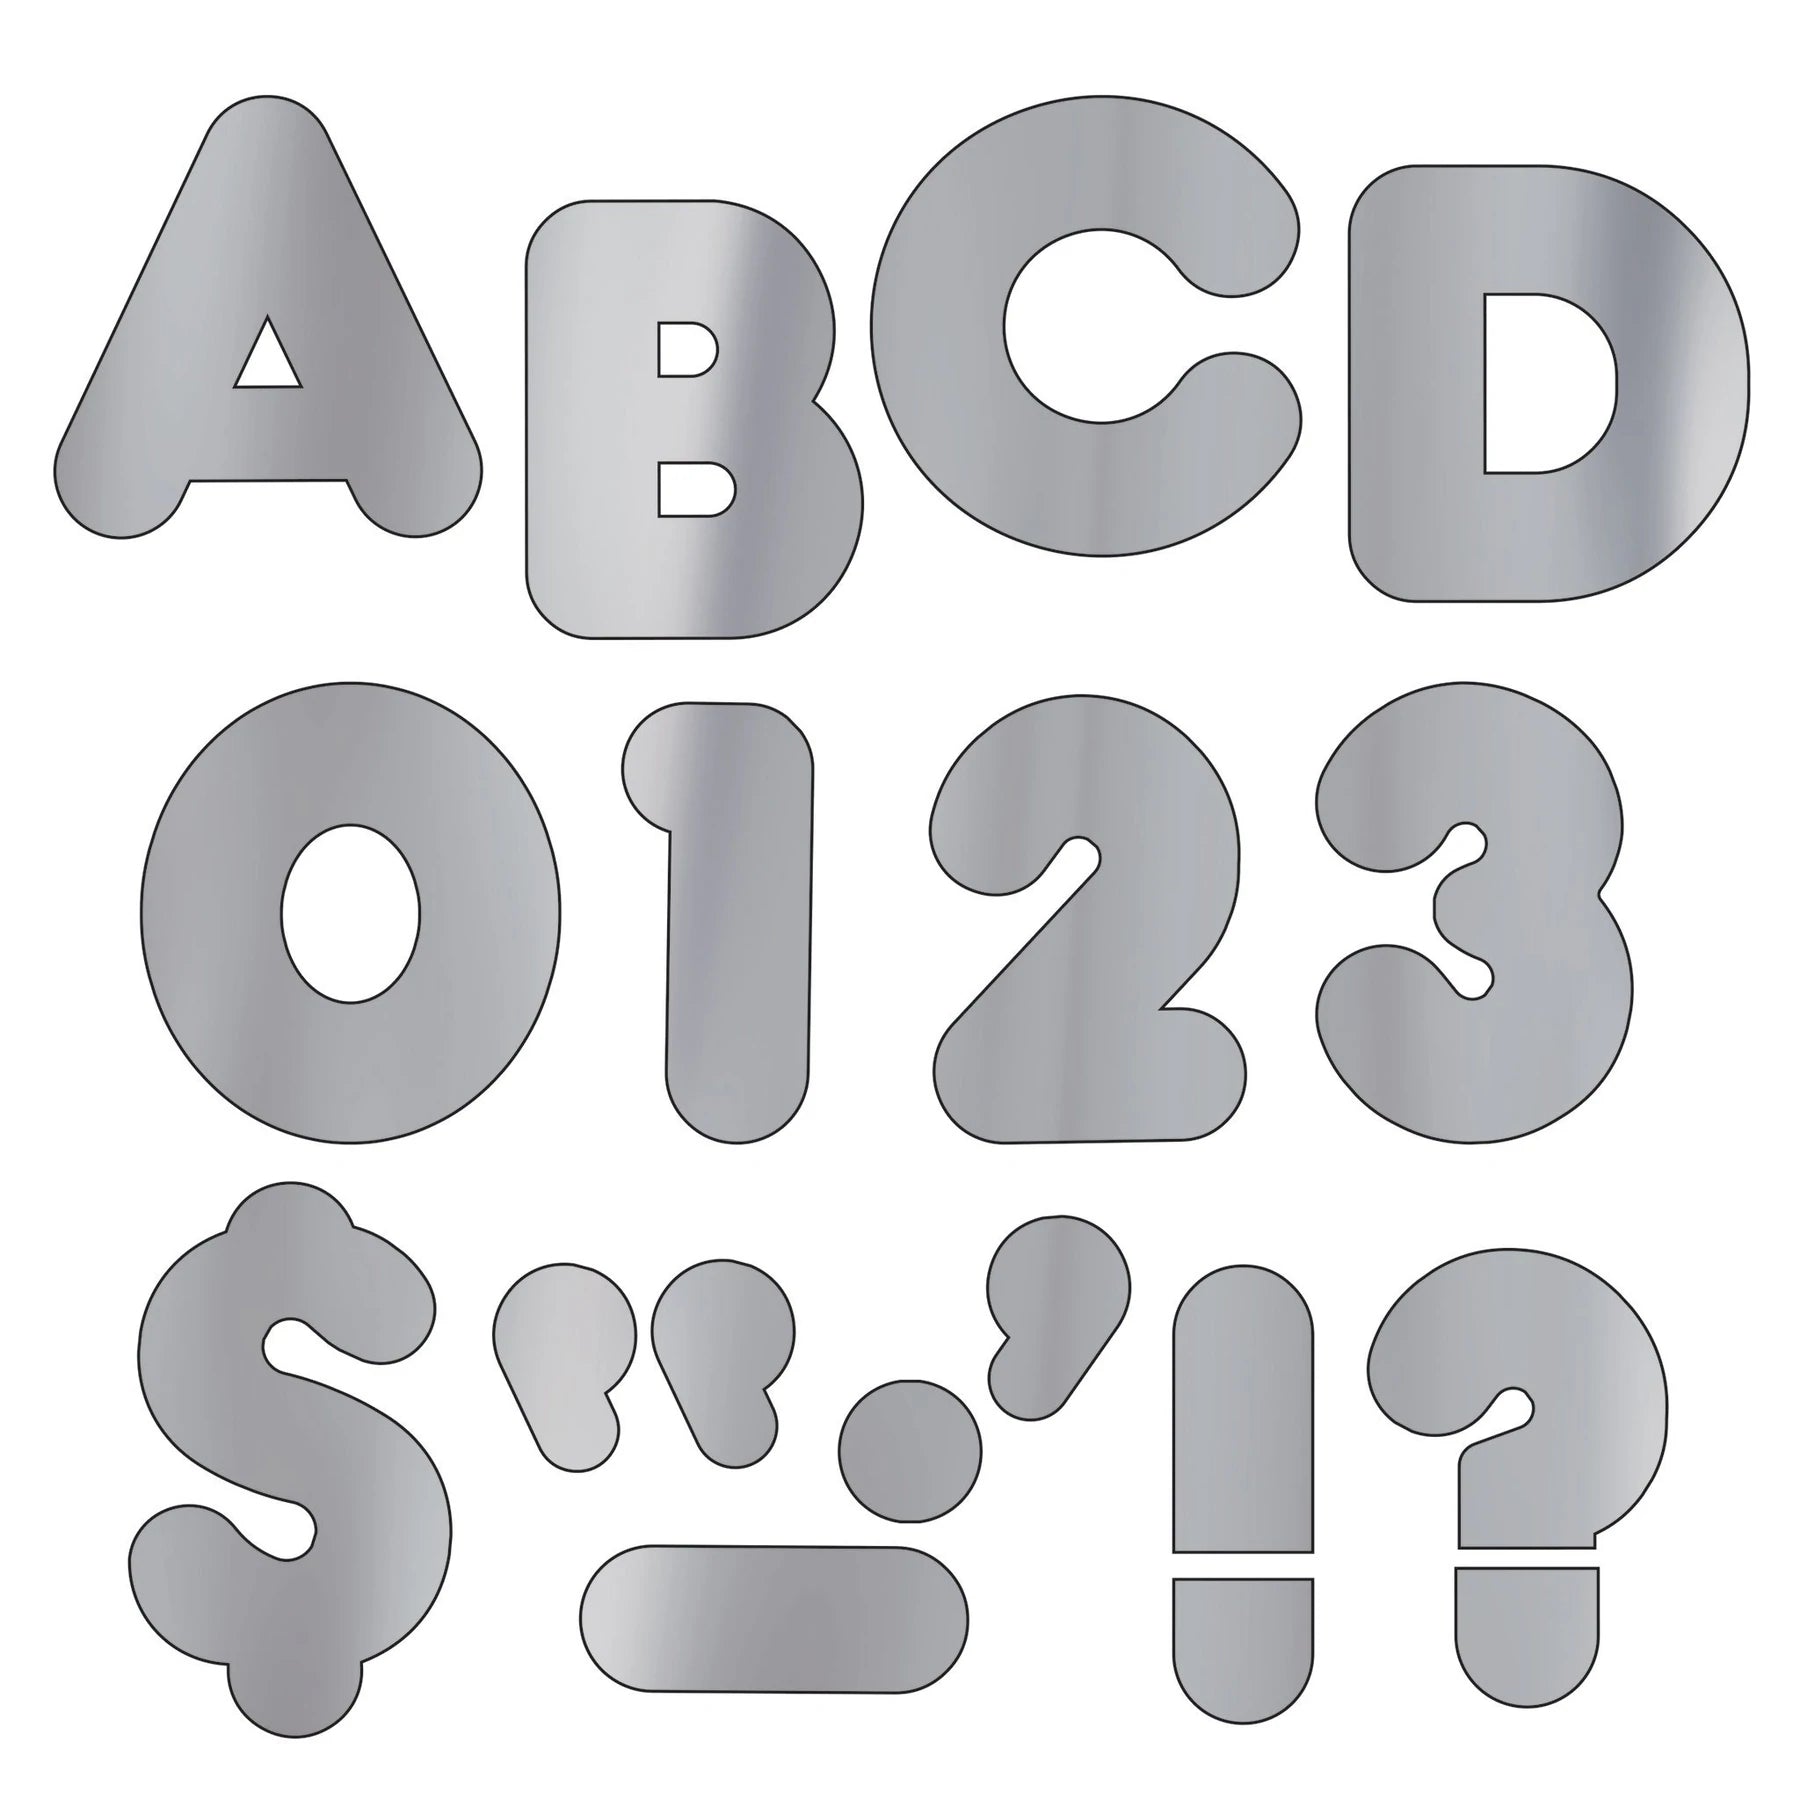 Trend Silver Metallic 2-Inch Casual Uppercase Ready Letters (T494)